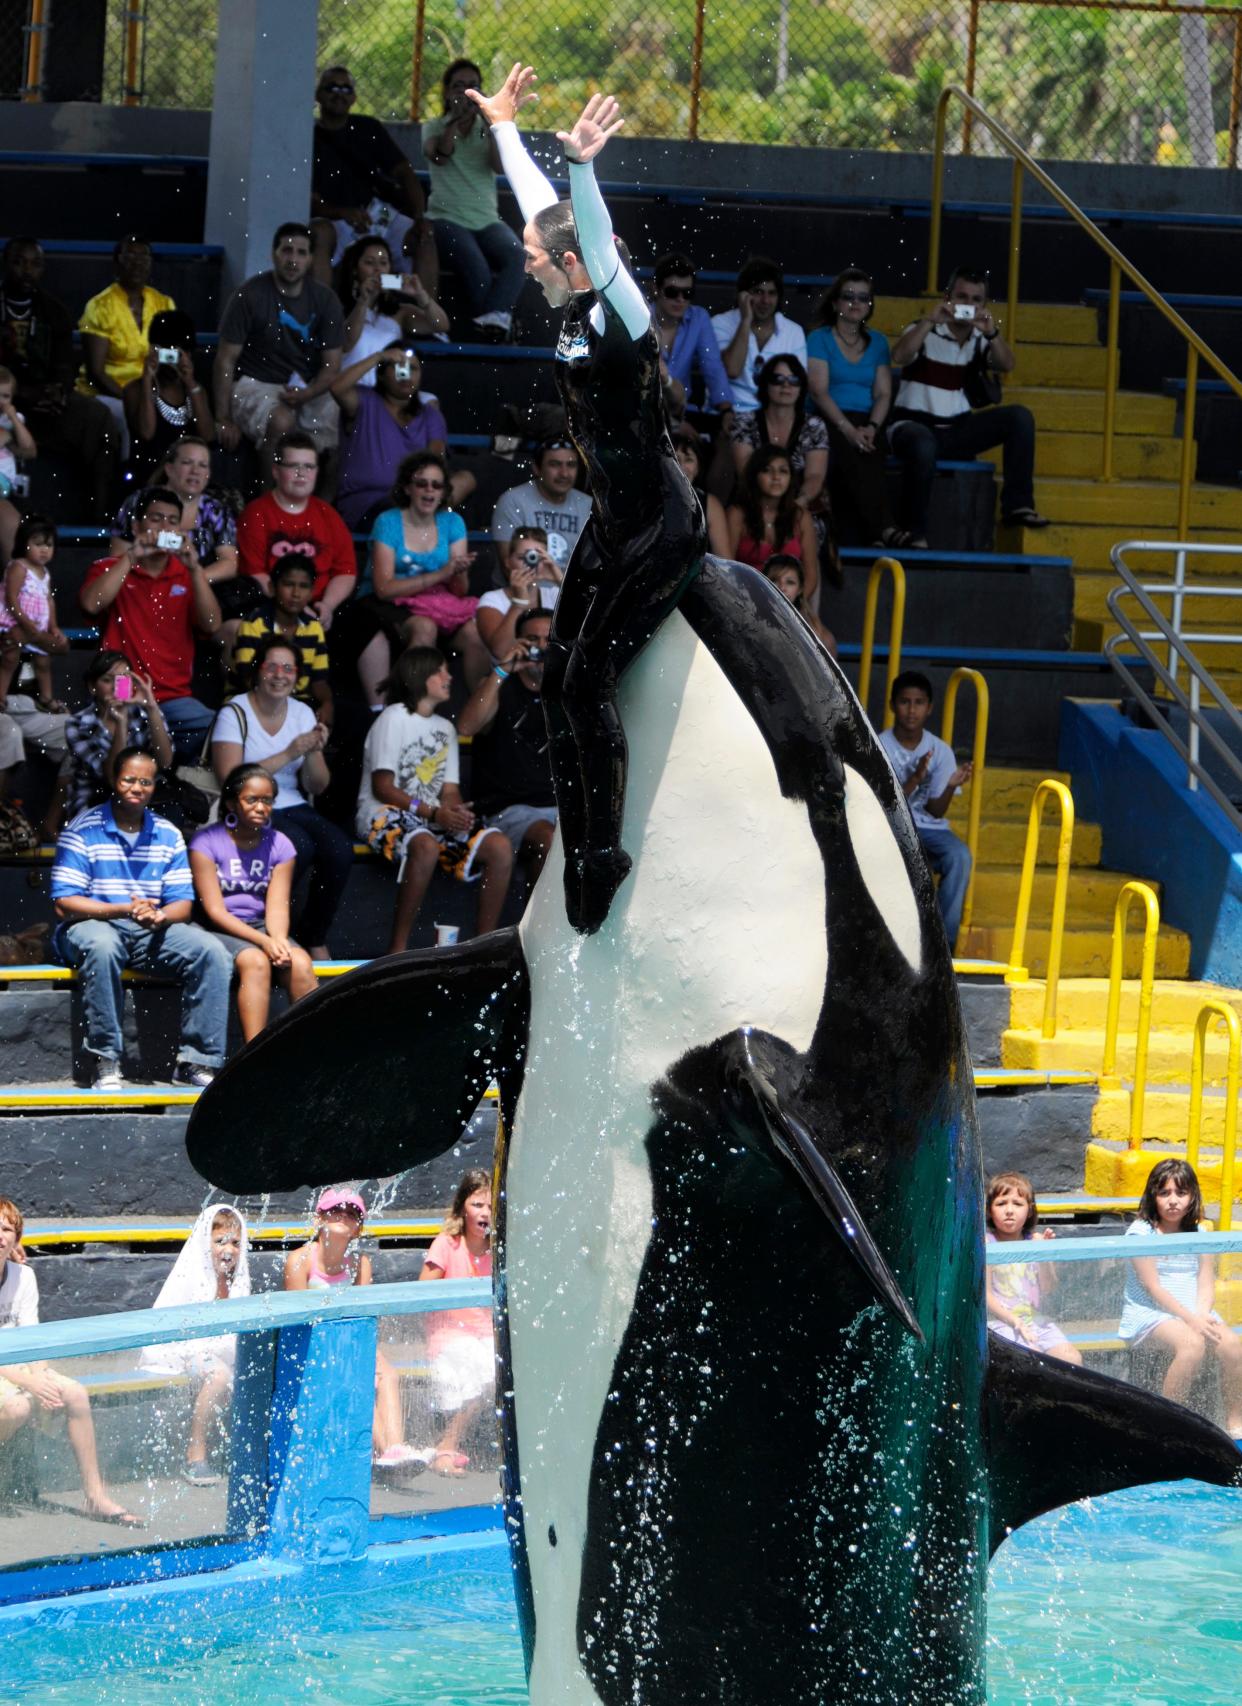 Lolita pushes her trainer up into the air at the Miami Seaquarium.